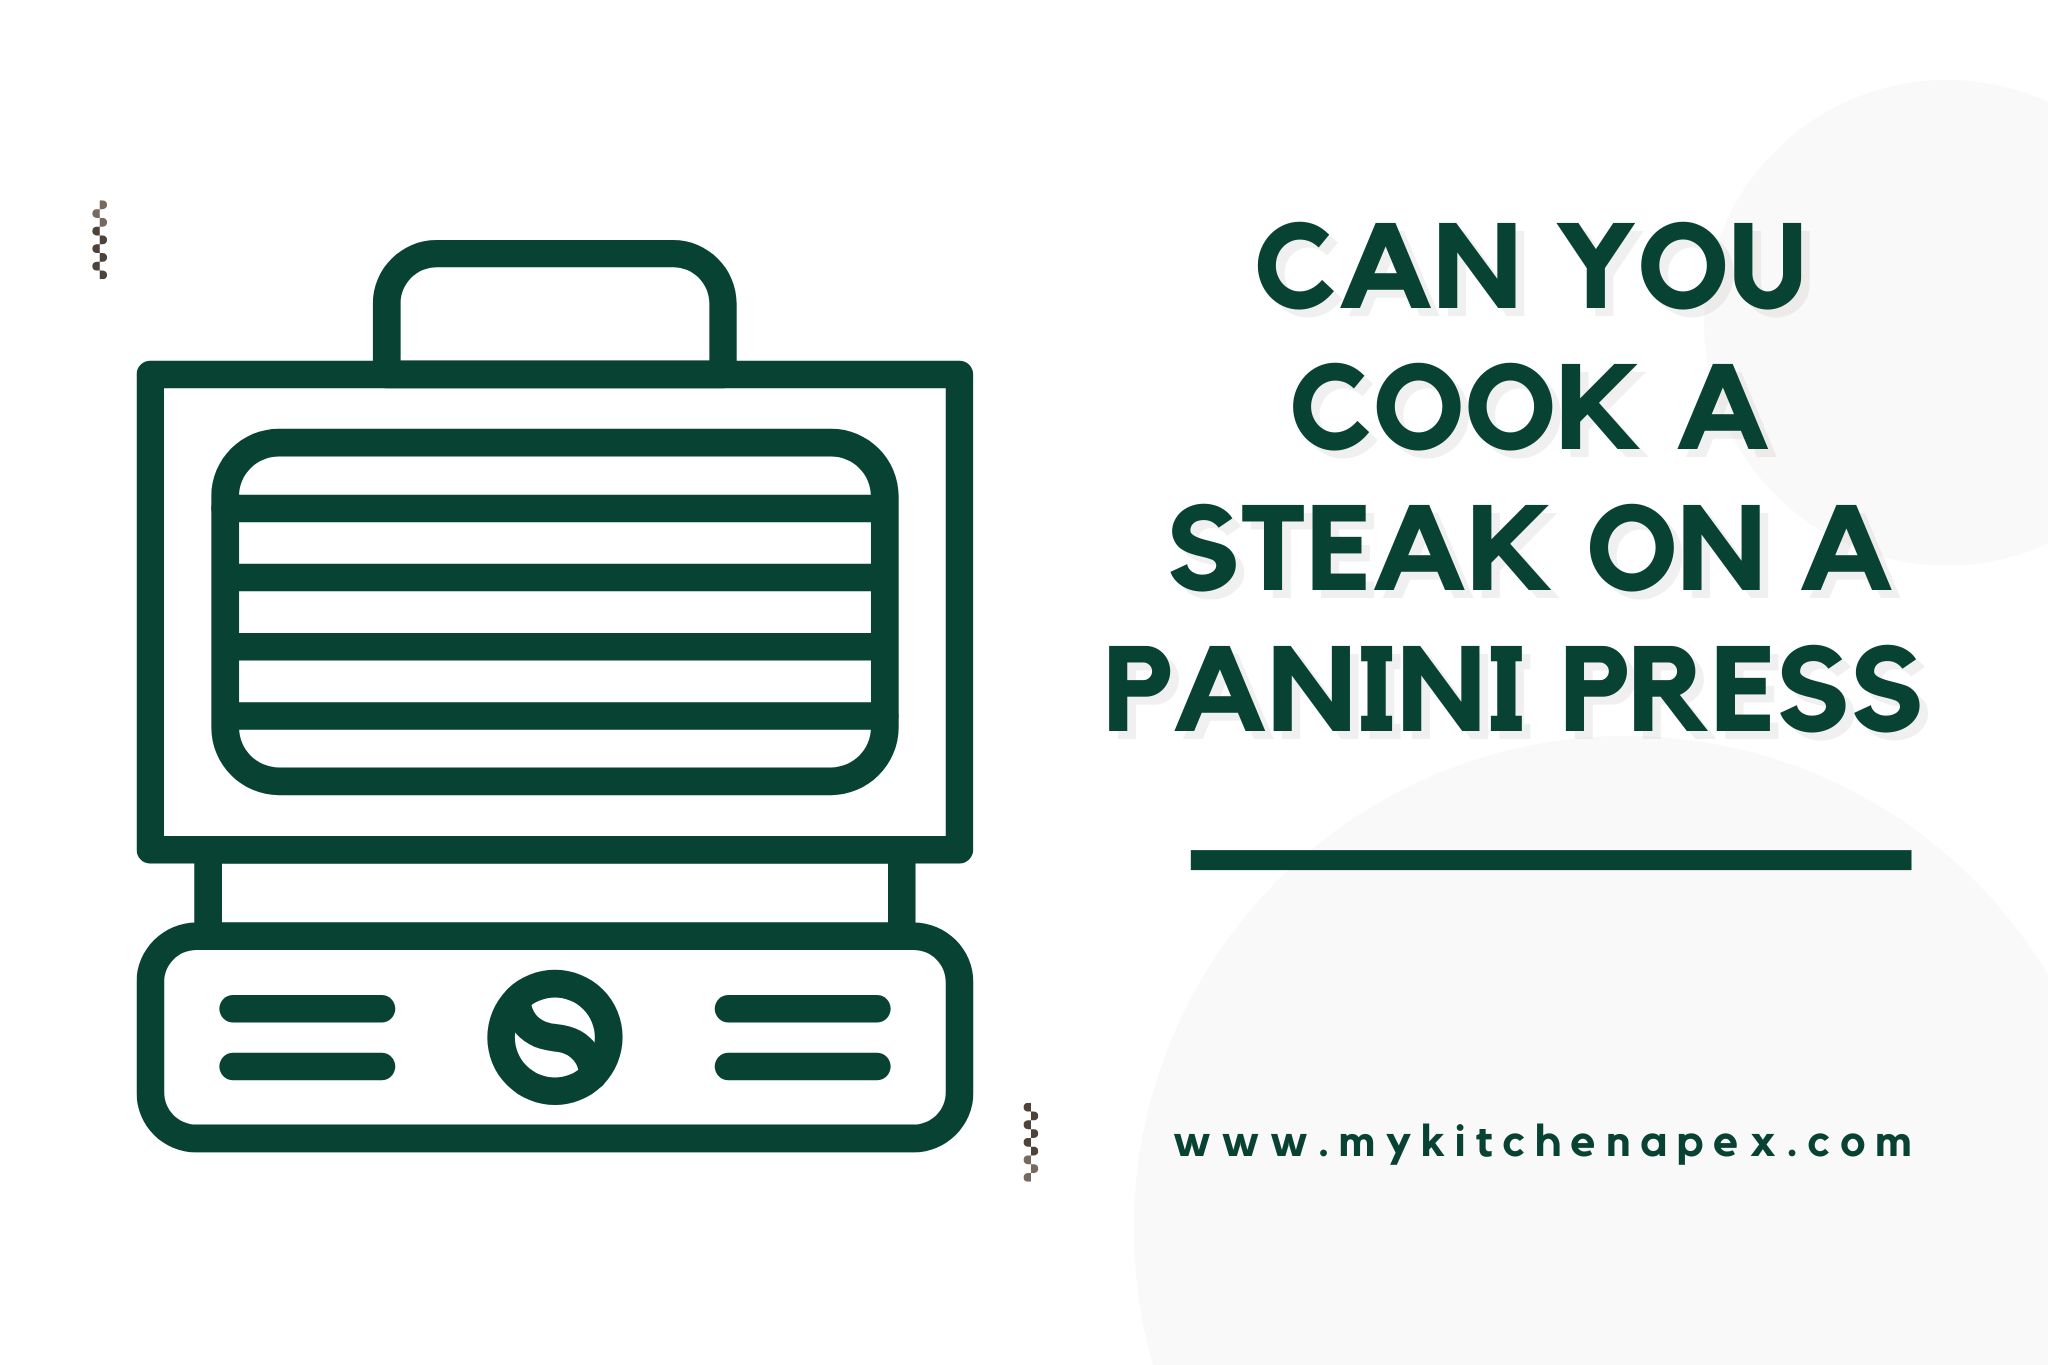 can you cook a steak on a panini press